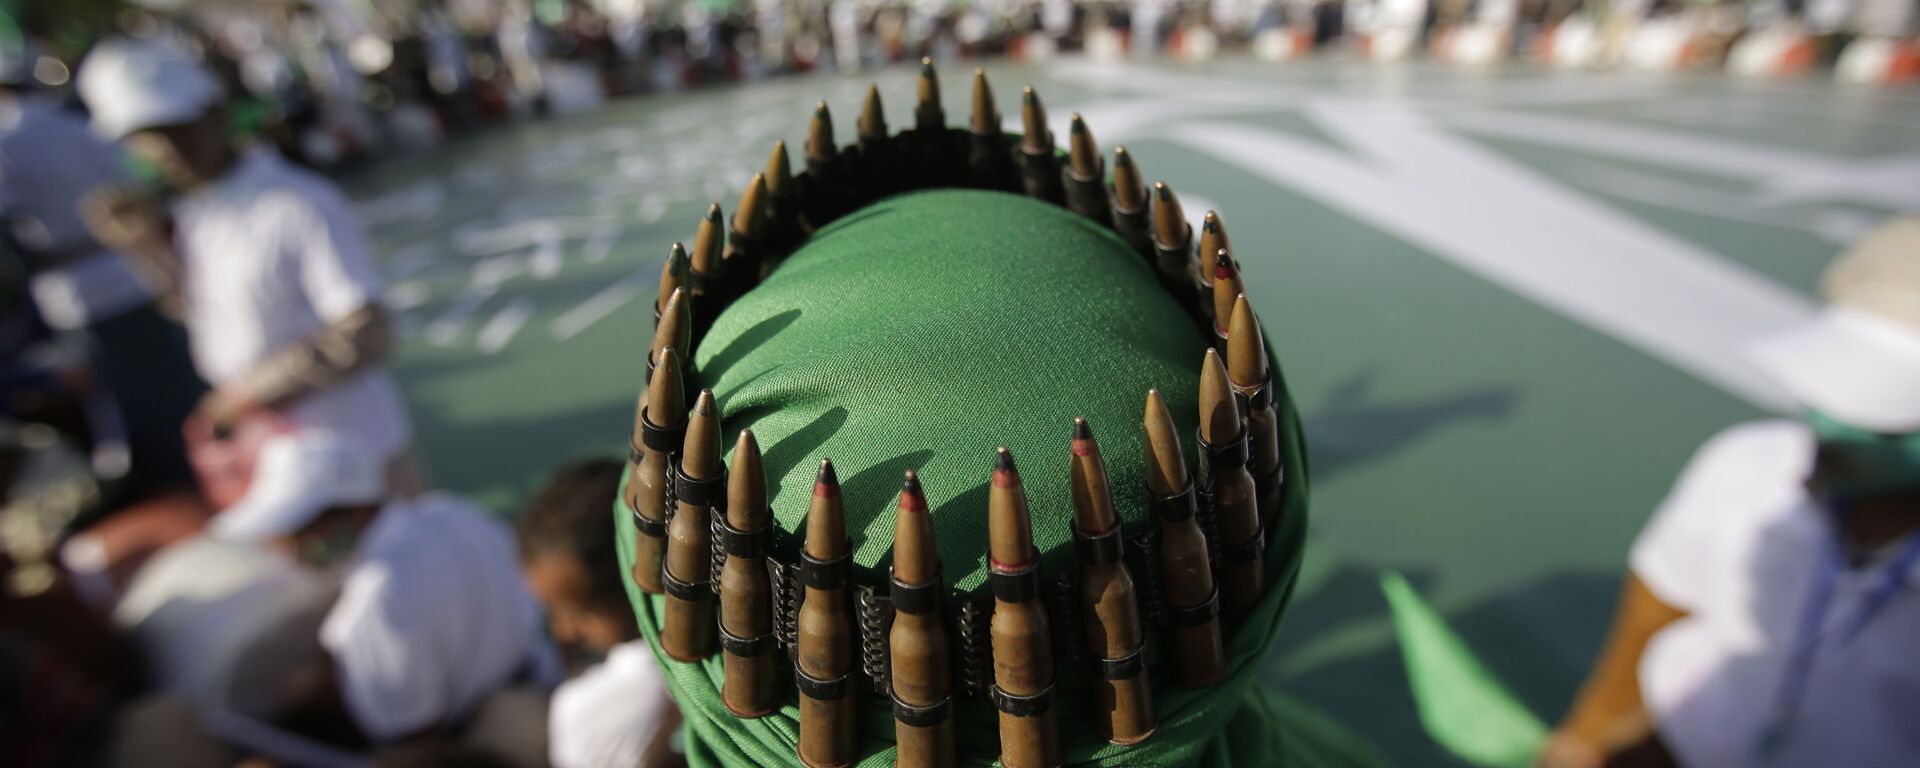 A supporter of Shiite rebels, known as Houthis, with an ammunition belt placed on his head attends a celebration of Moulid al-nabi, the birth of Islam's prophet Muhammad in Sanaa, Yemen, Saturday, Nov. 9, 2019 - Sputnik International, 1920, 23.02.2024